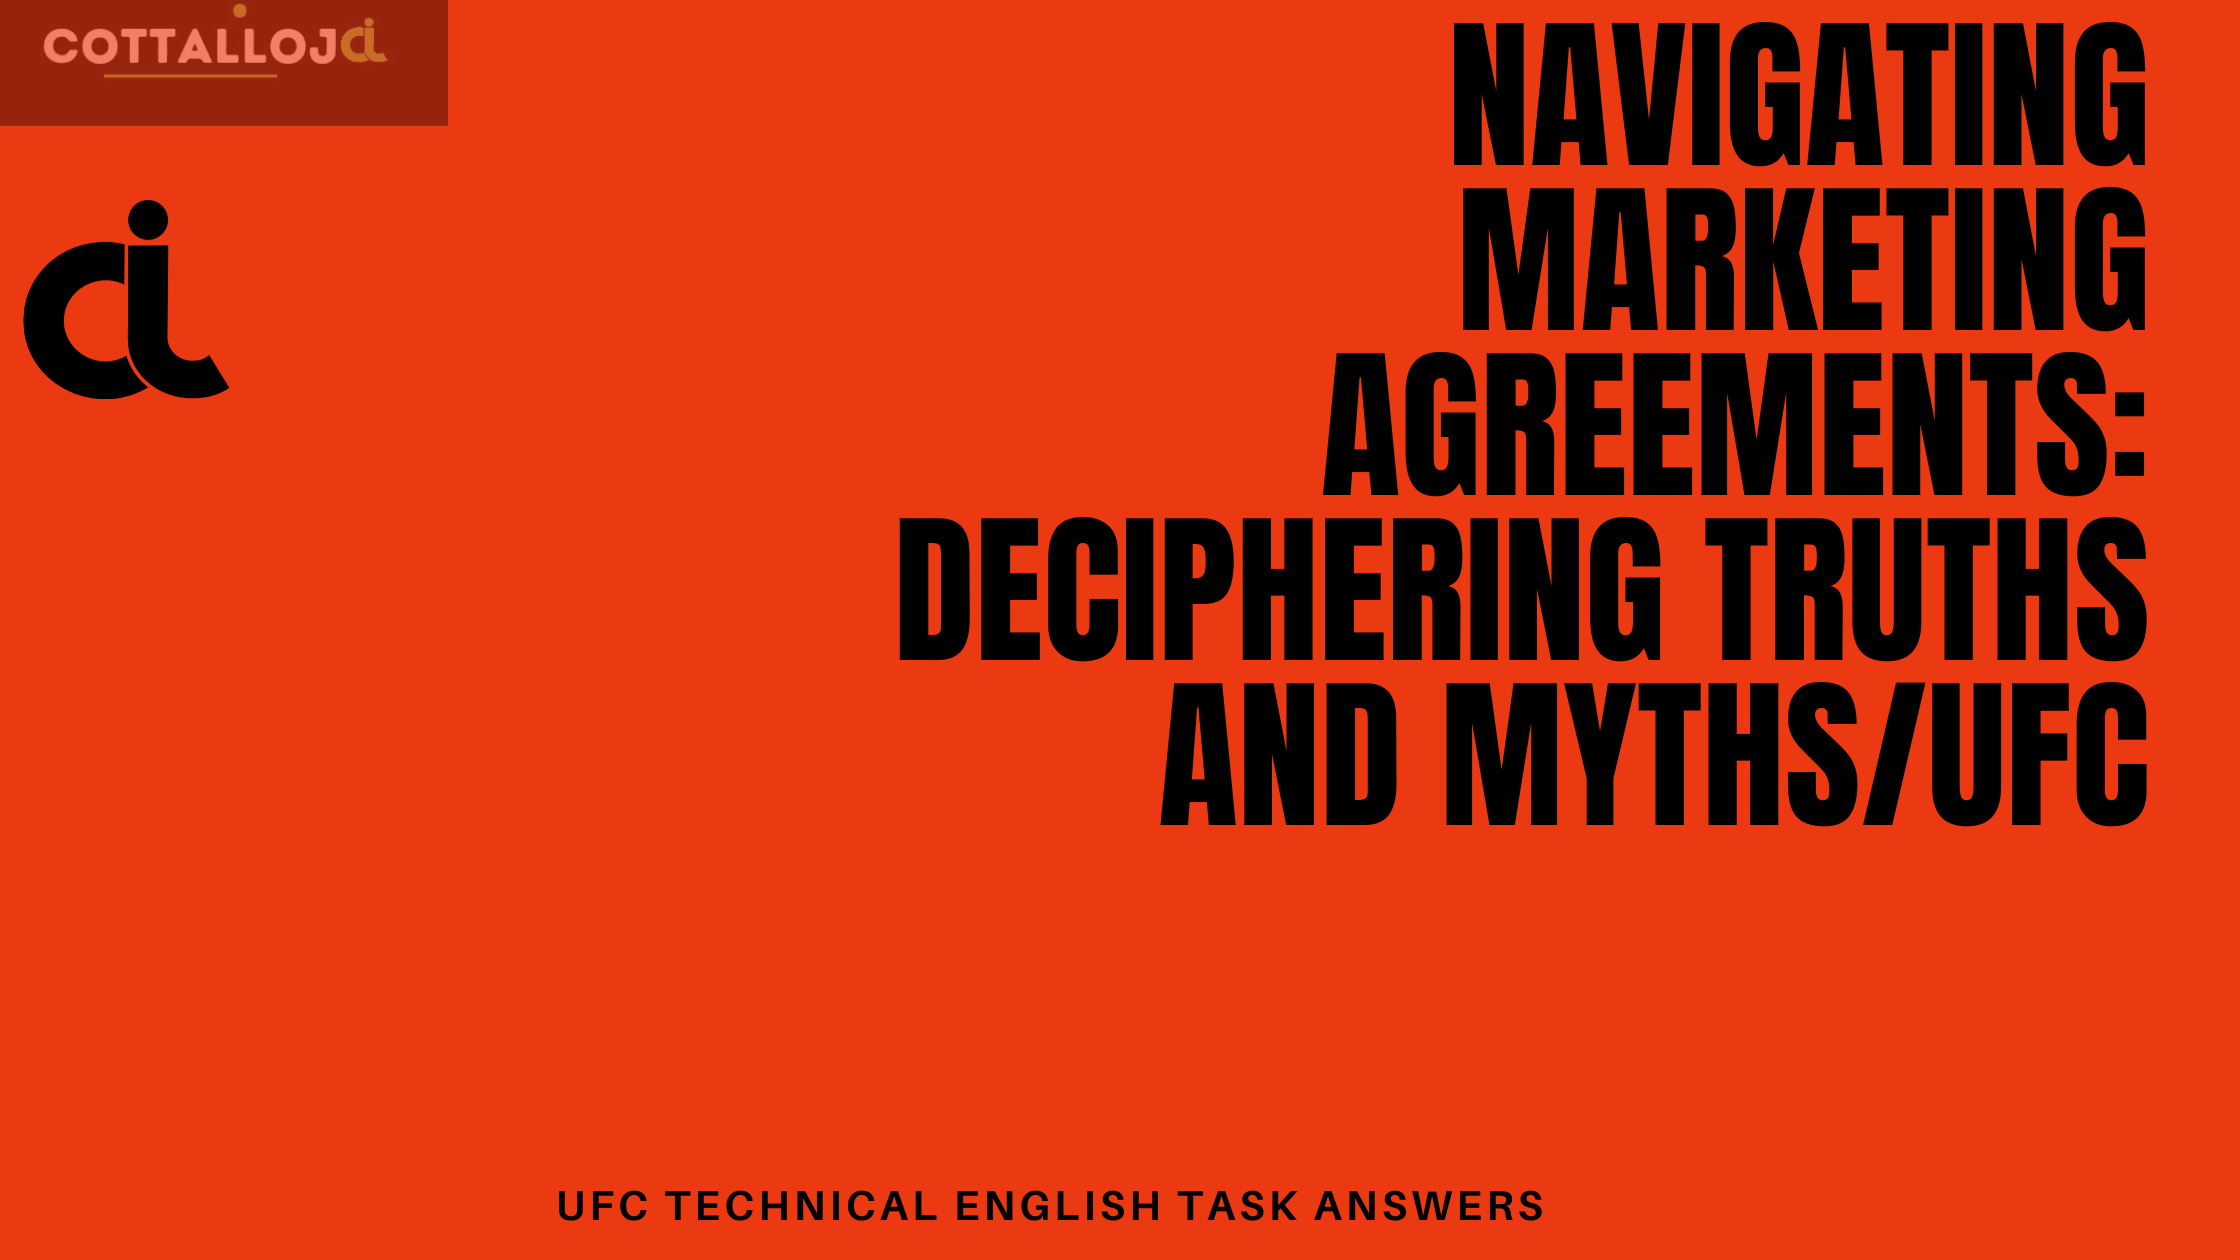 Navigating Marketing Agreements: Deciphering Truths and Myths/UFC